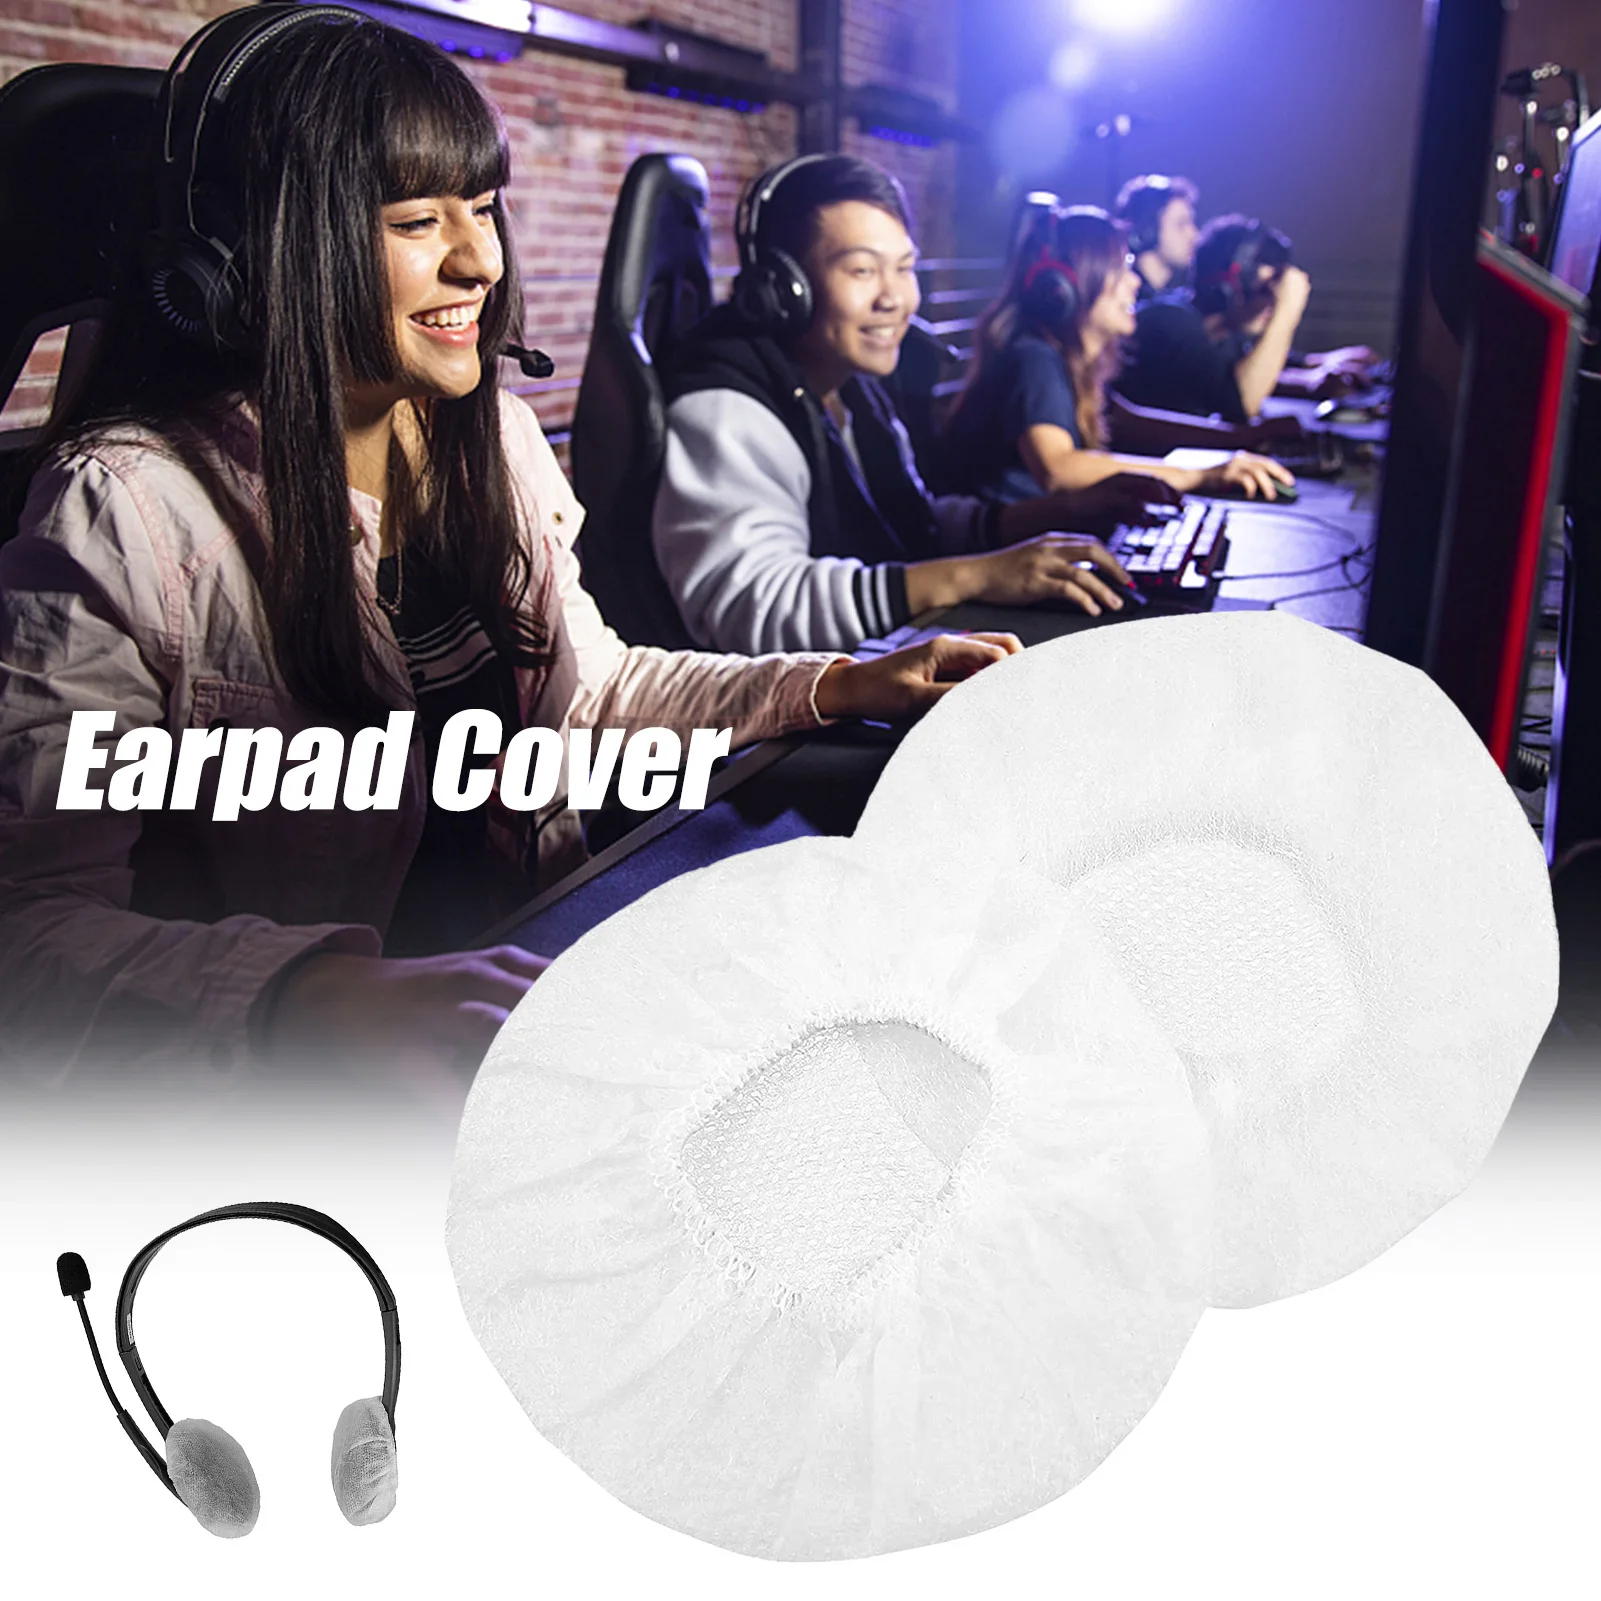 100Pcs Disposable Headphone Ear Covers Non-Woven Earpad Covers Stretchy Earcup Covers Fit For Most On Ear Headphones